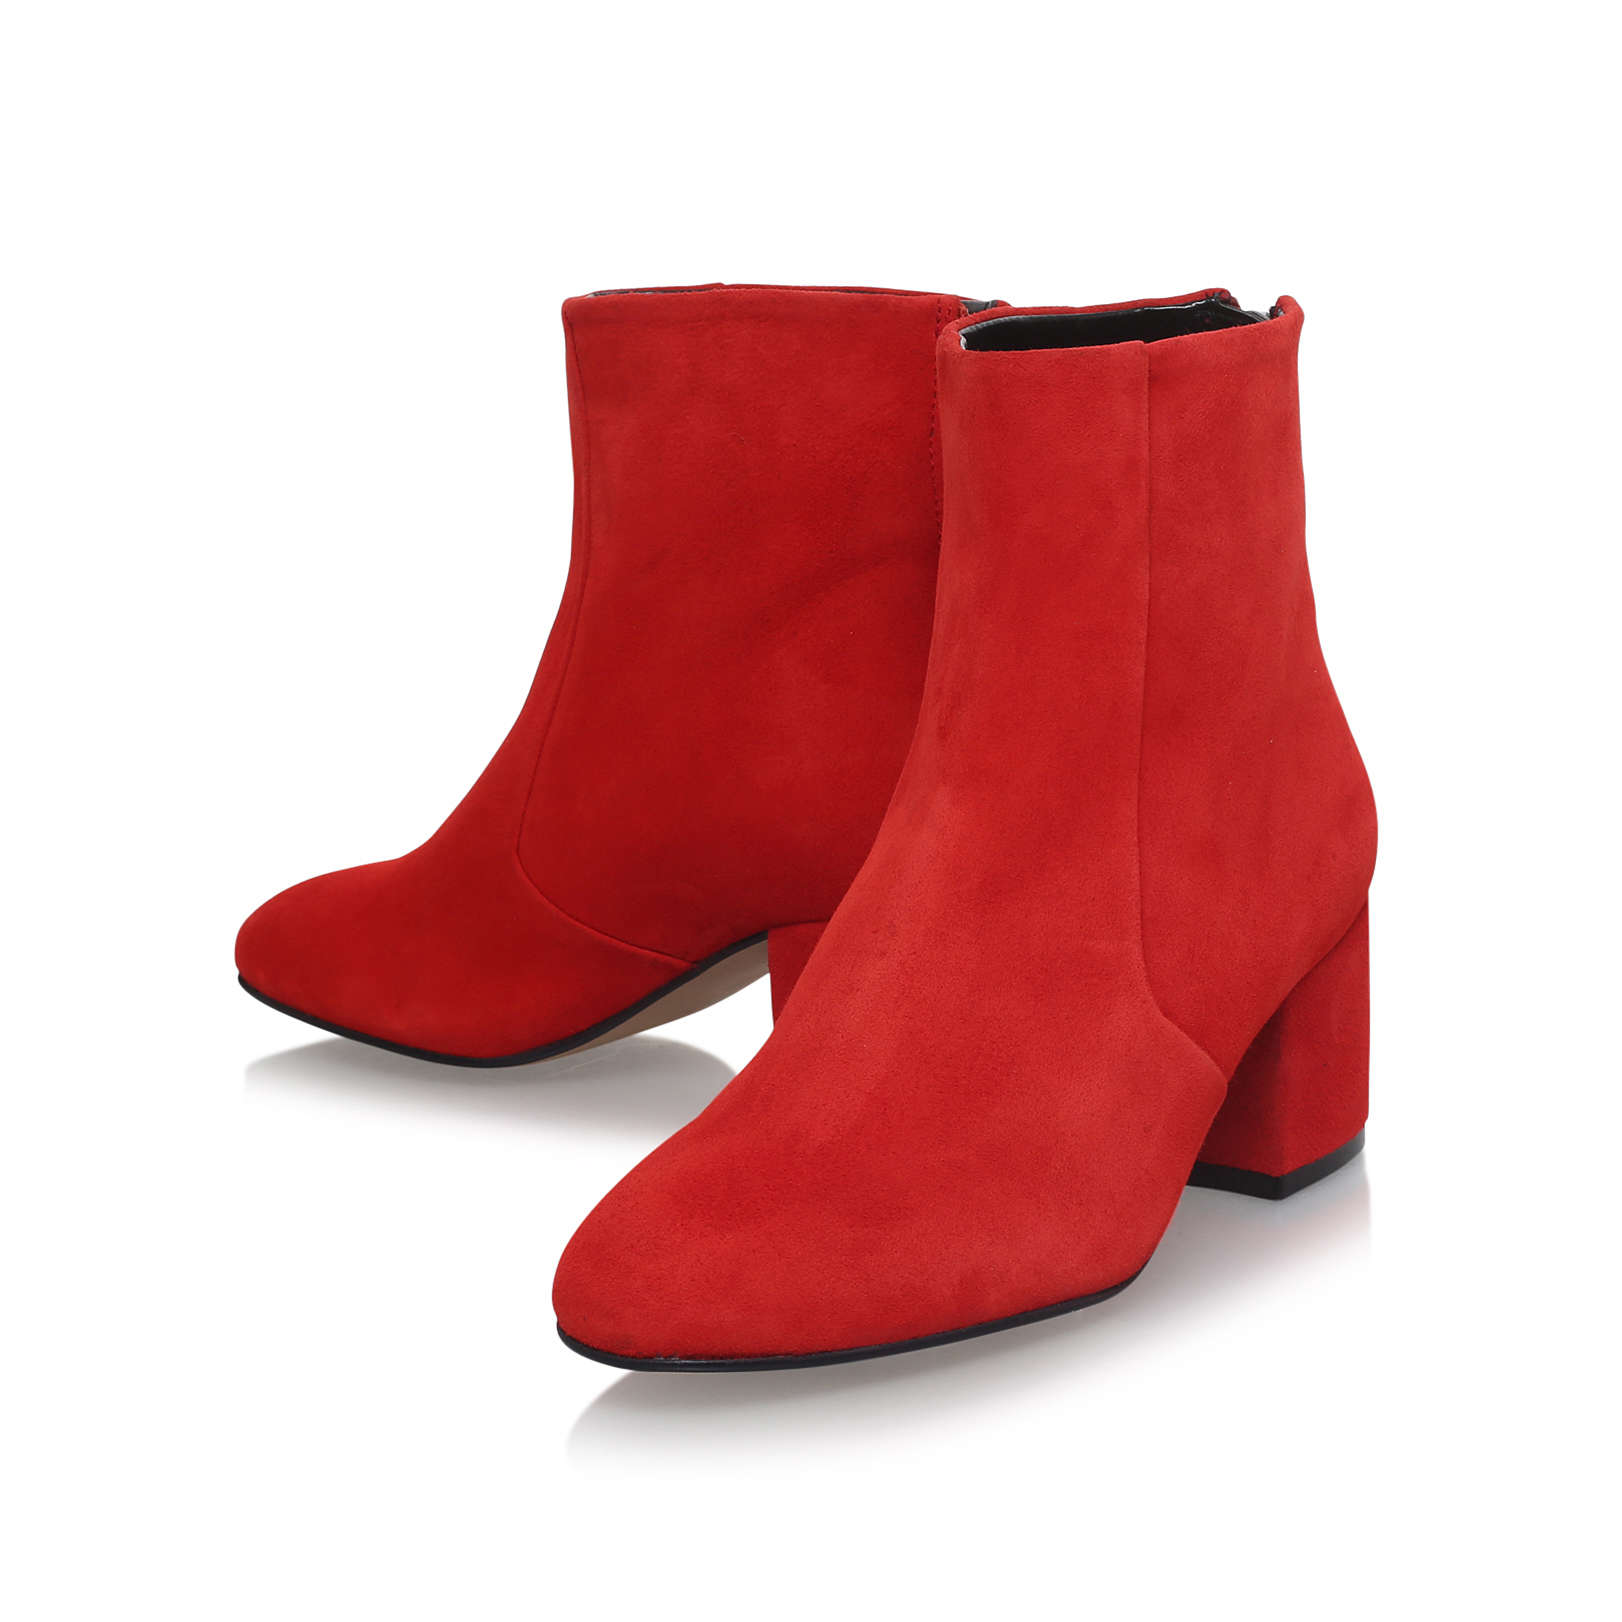 Buy carvela suede boots cheap,up to 71 